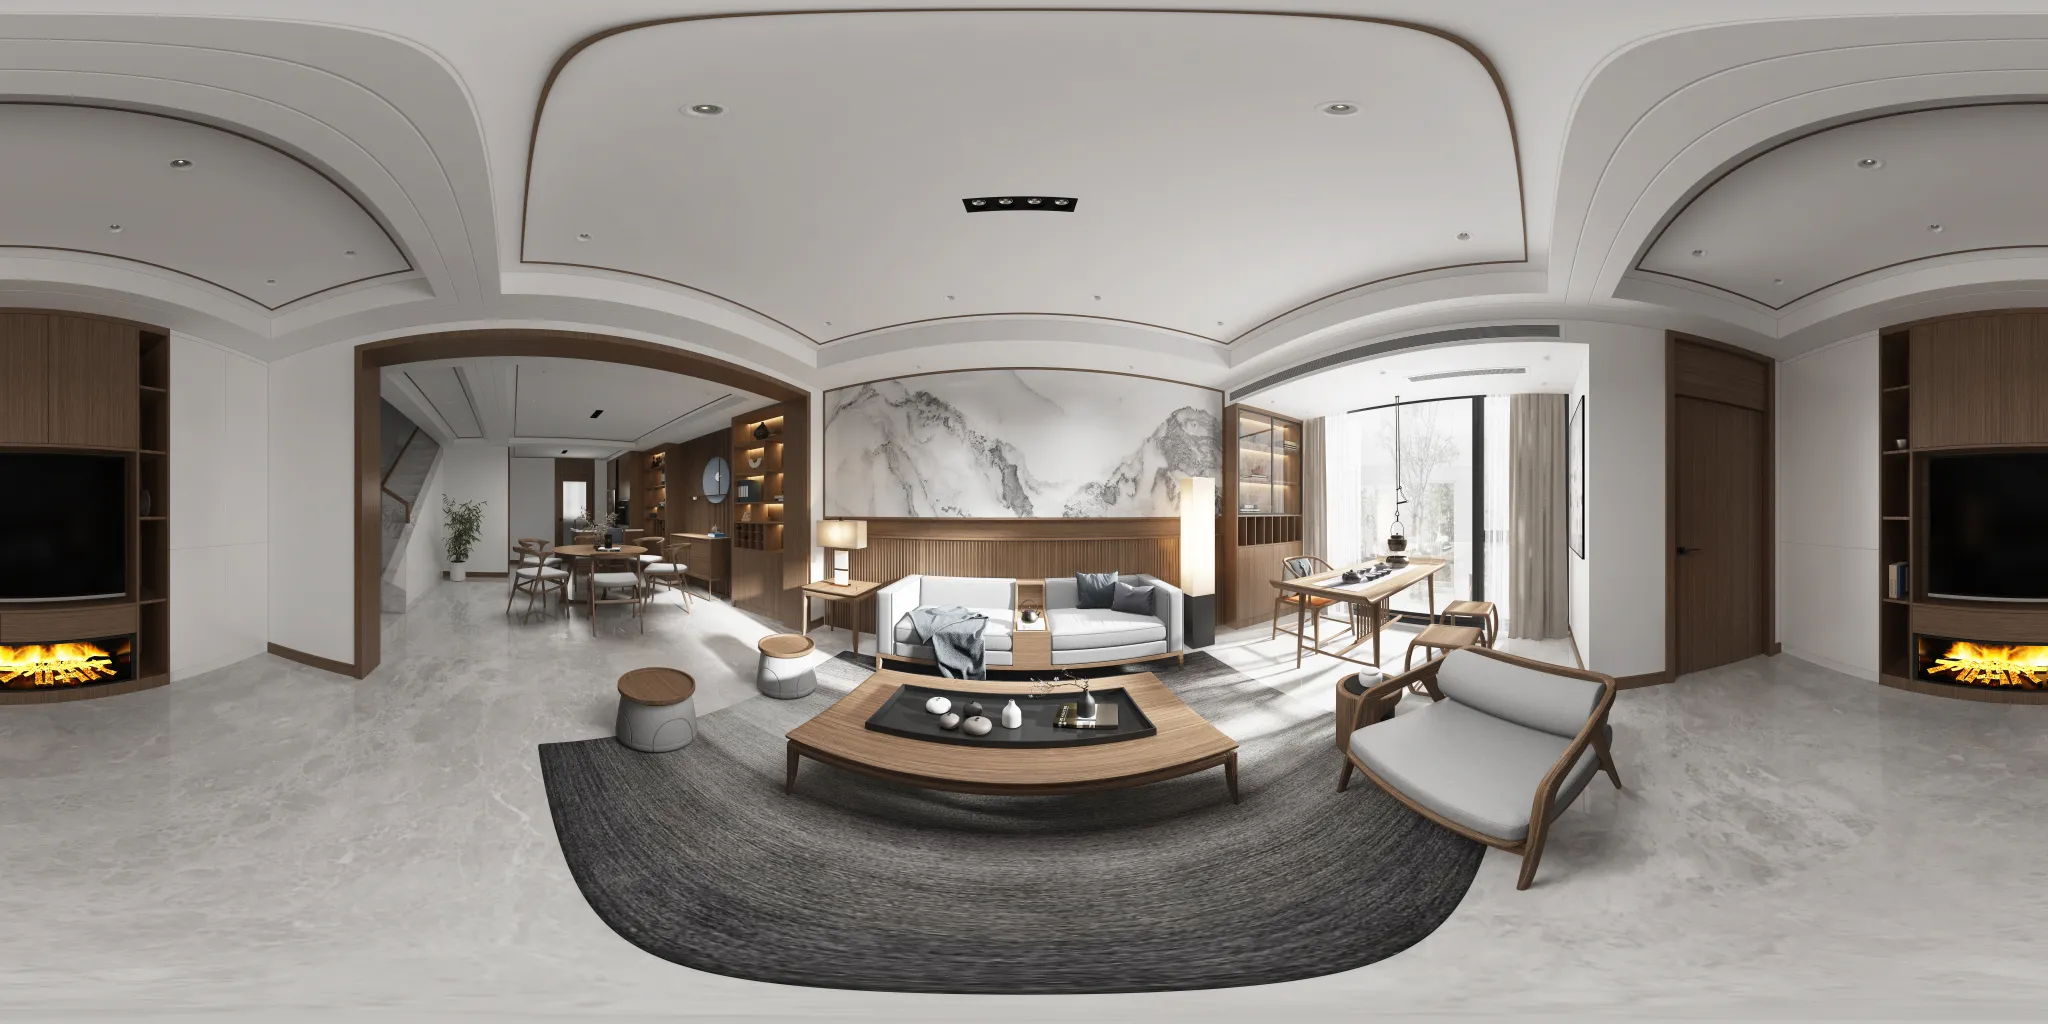 DESMOD INTERIOR 2021 (VRAY) – 4. LIVING ROOM – CHINESE – 131 (1)